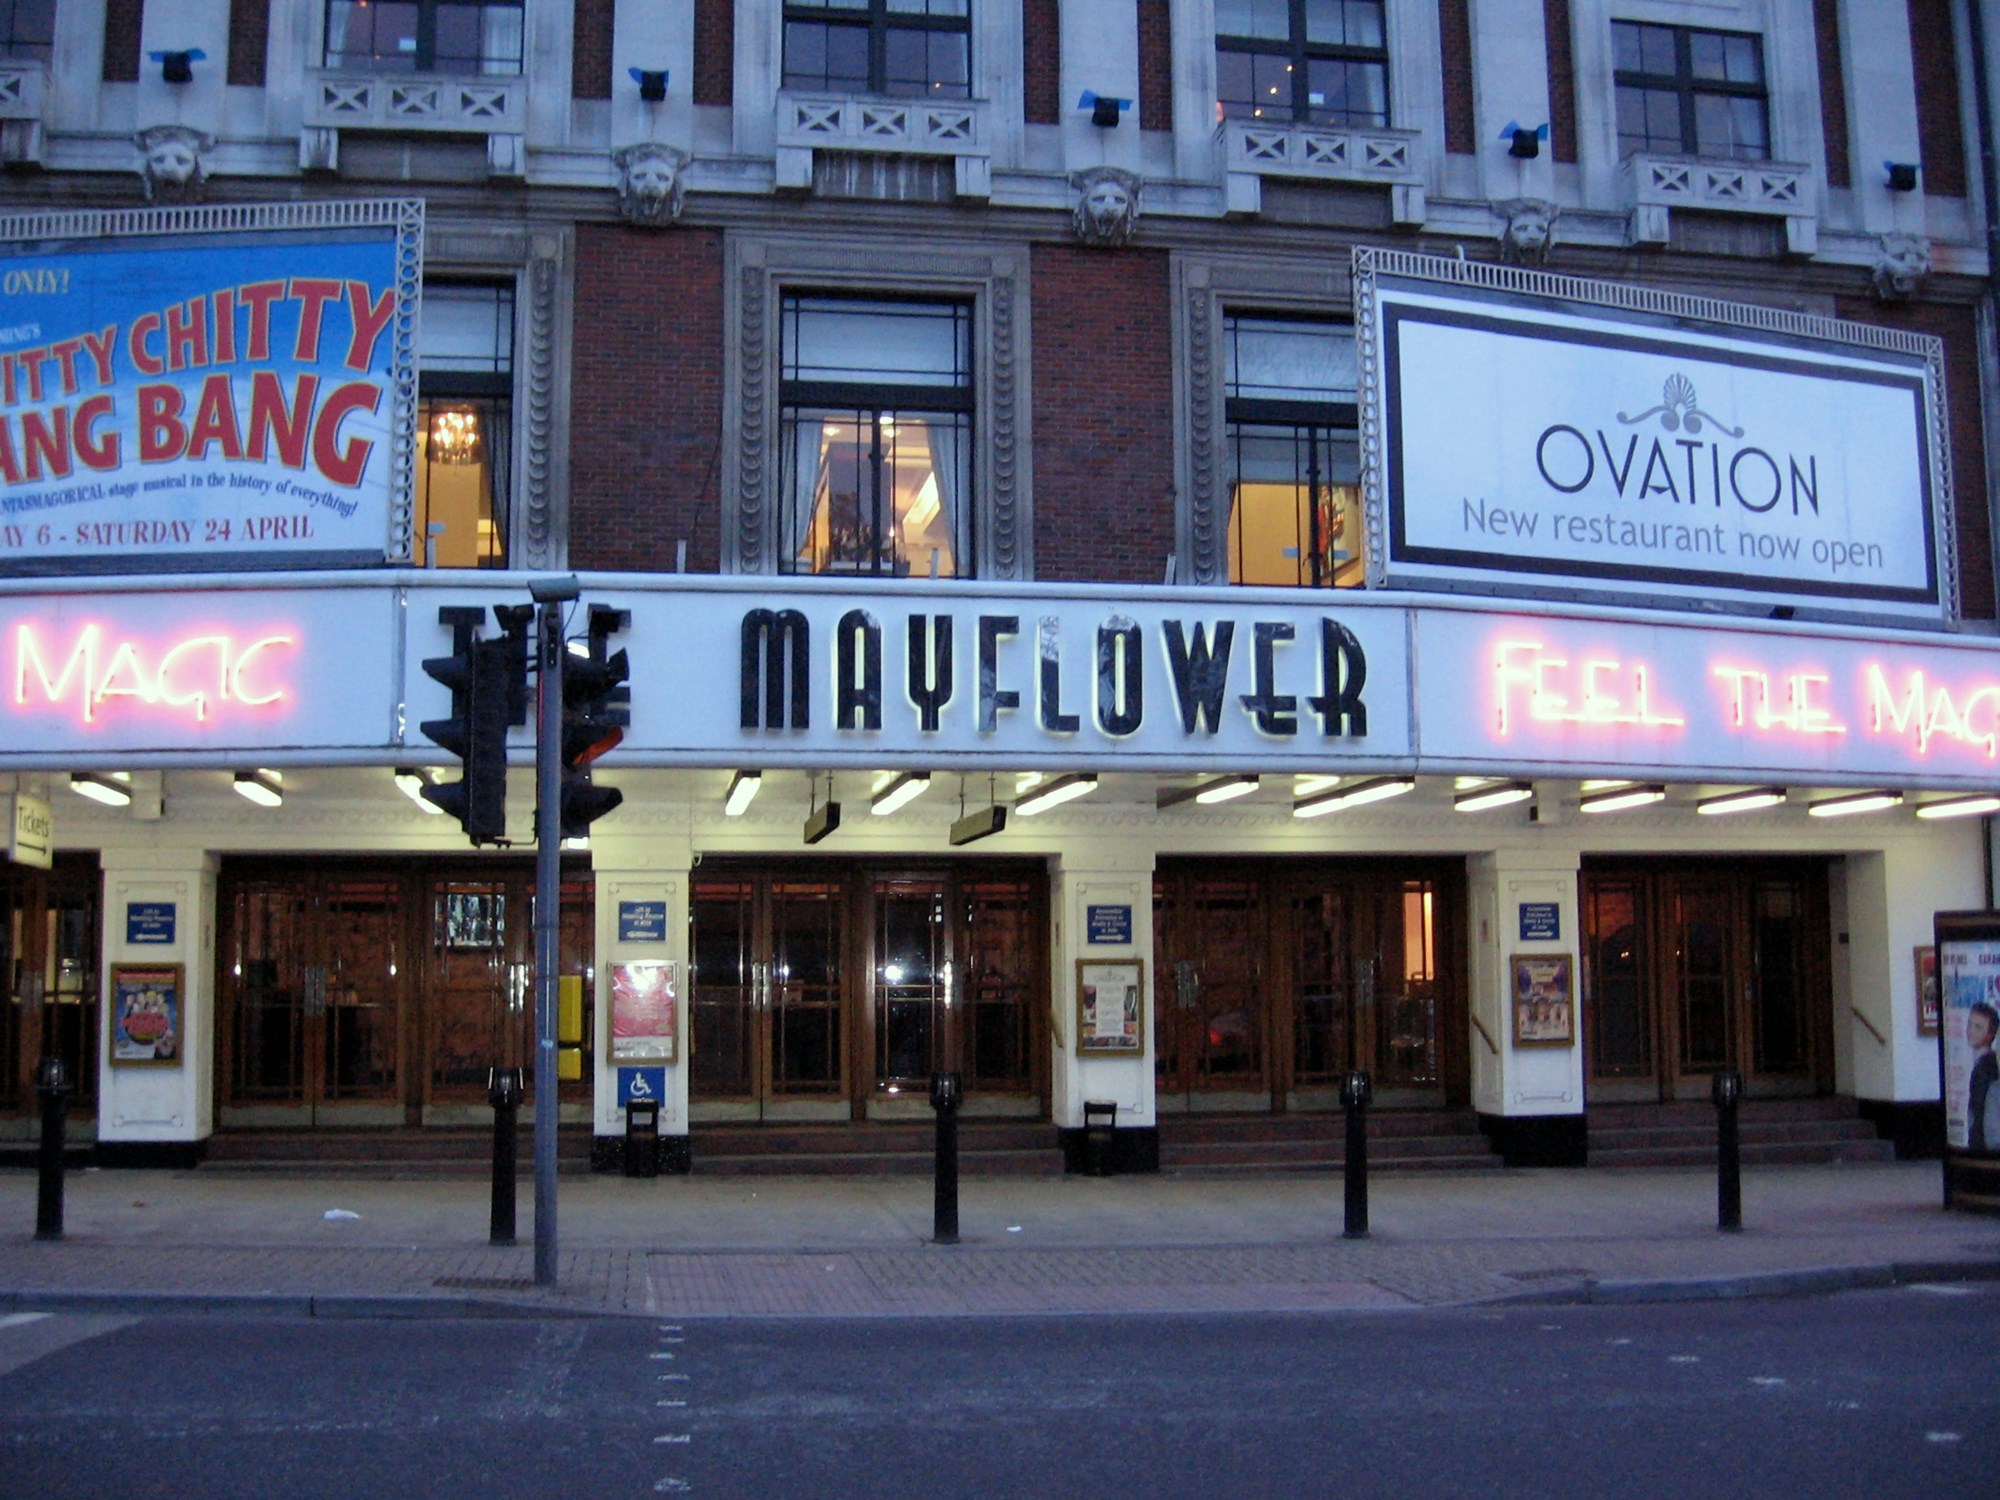 Mayflower Theatre located in Southampton